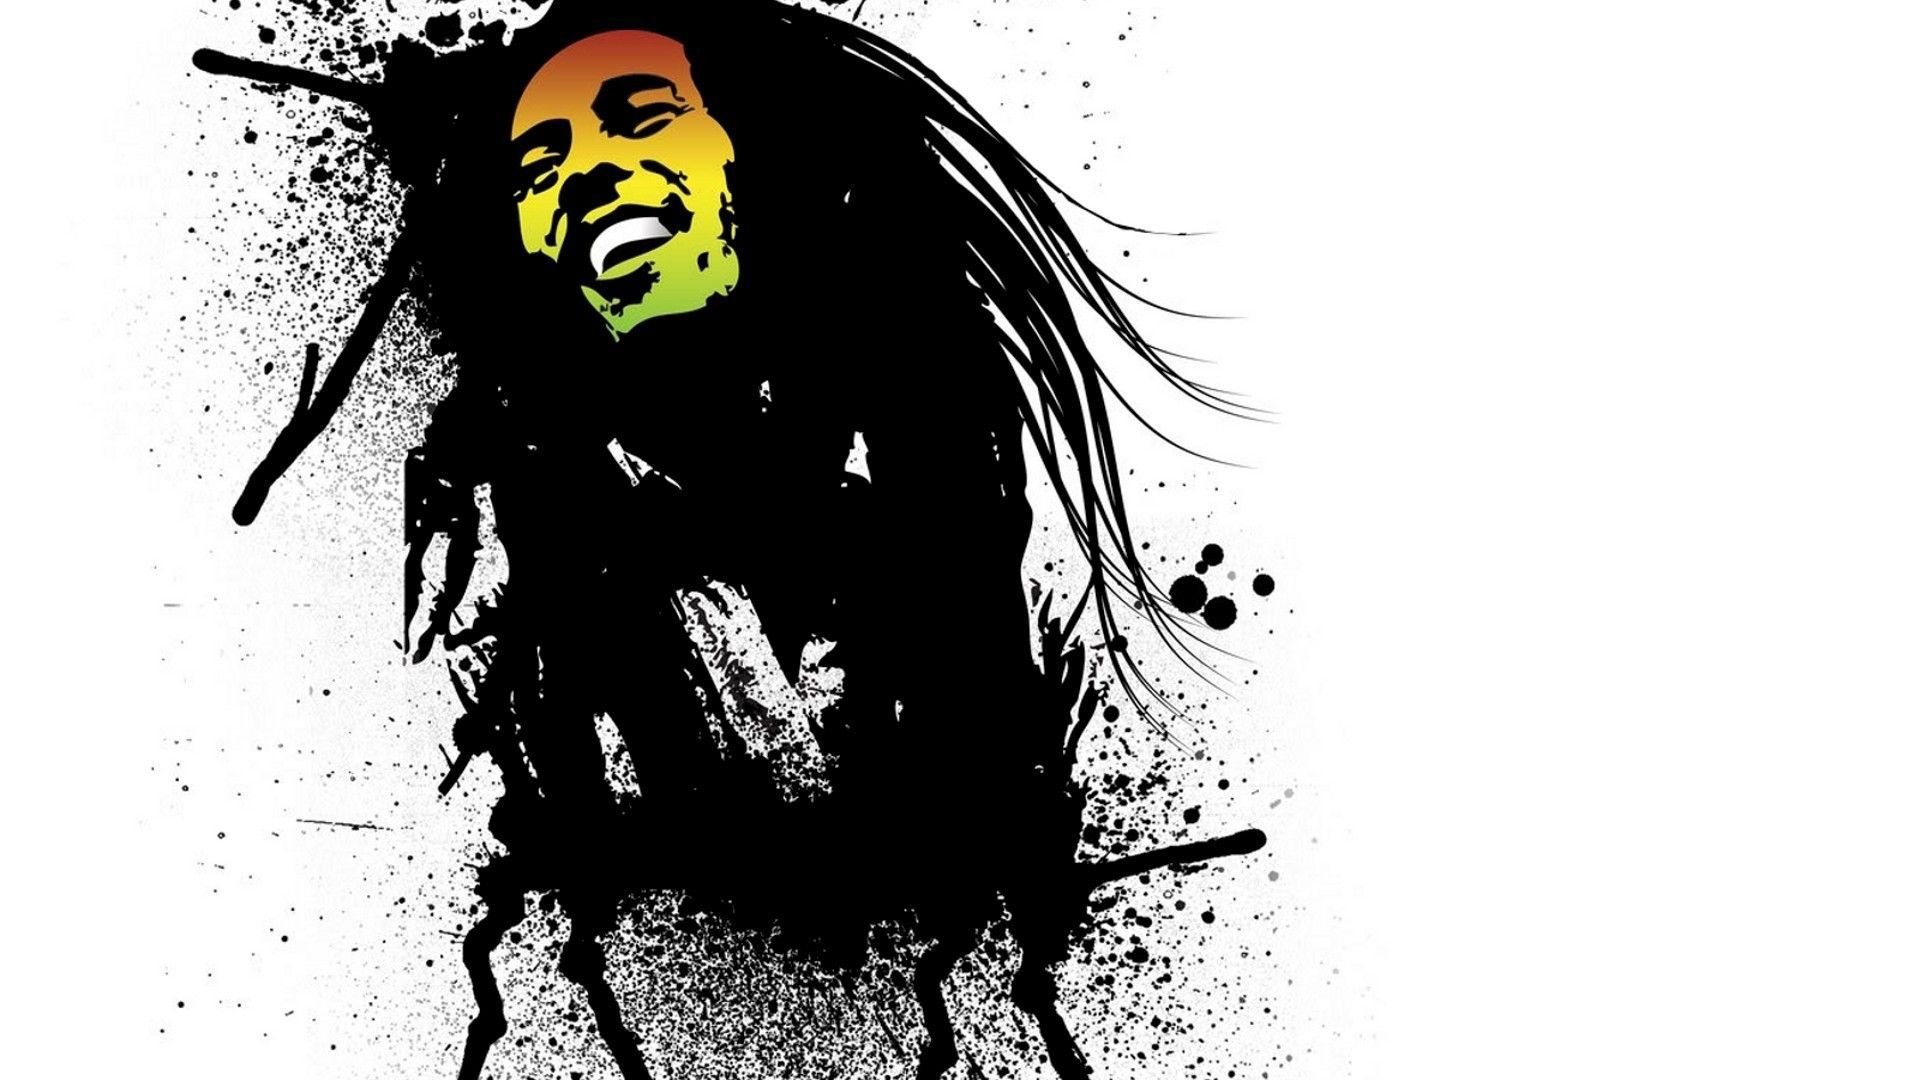 Top Bob Marley Hd Wallpapers Images for Pinterest